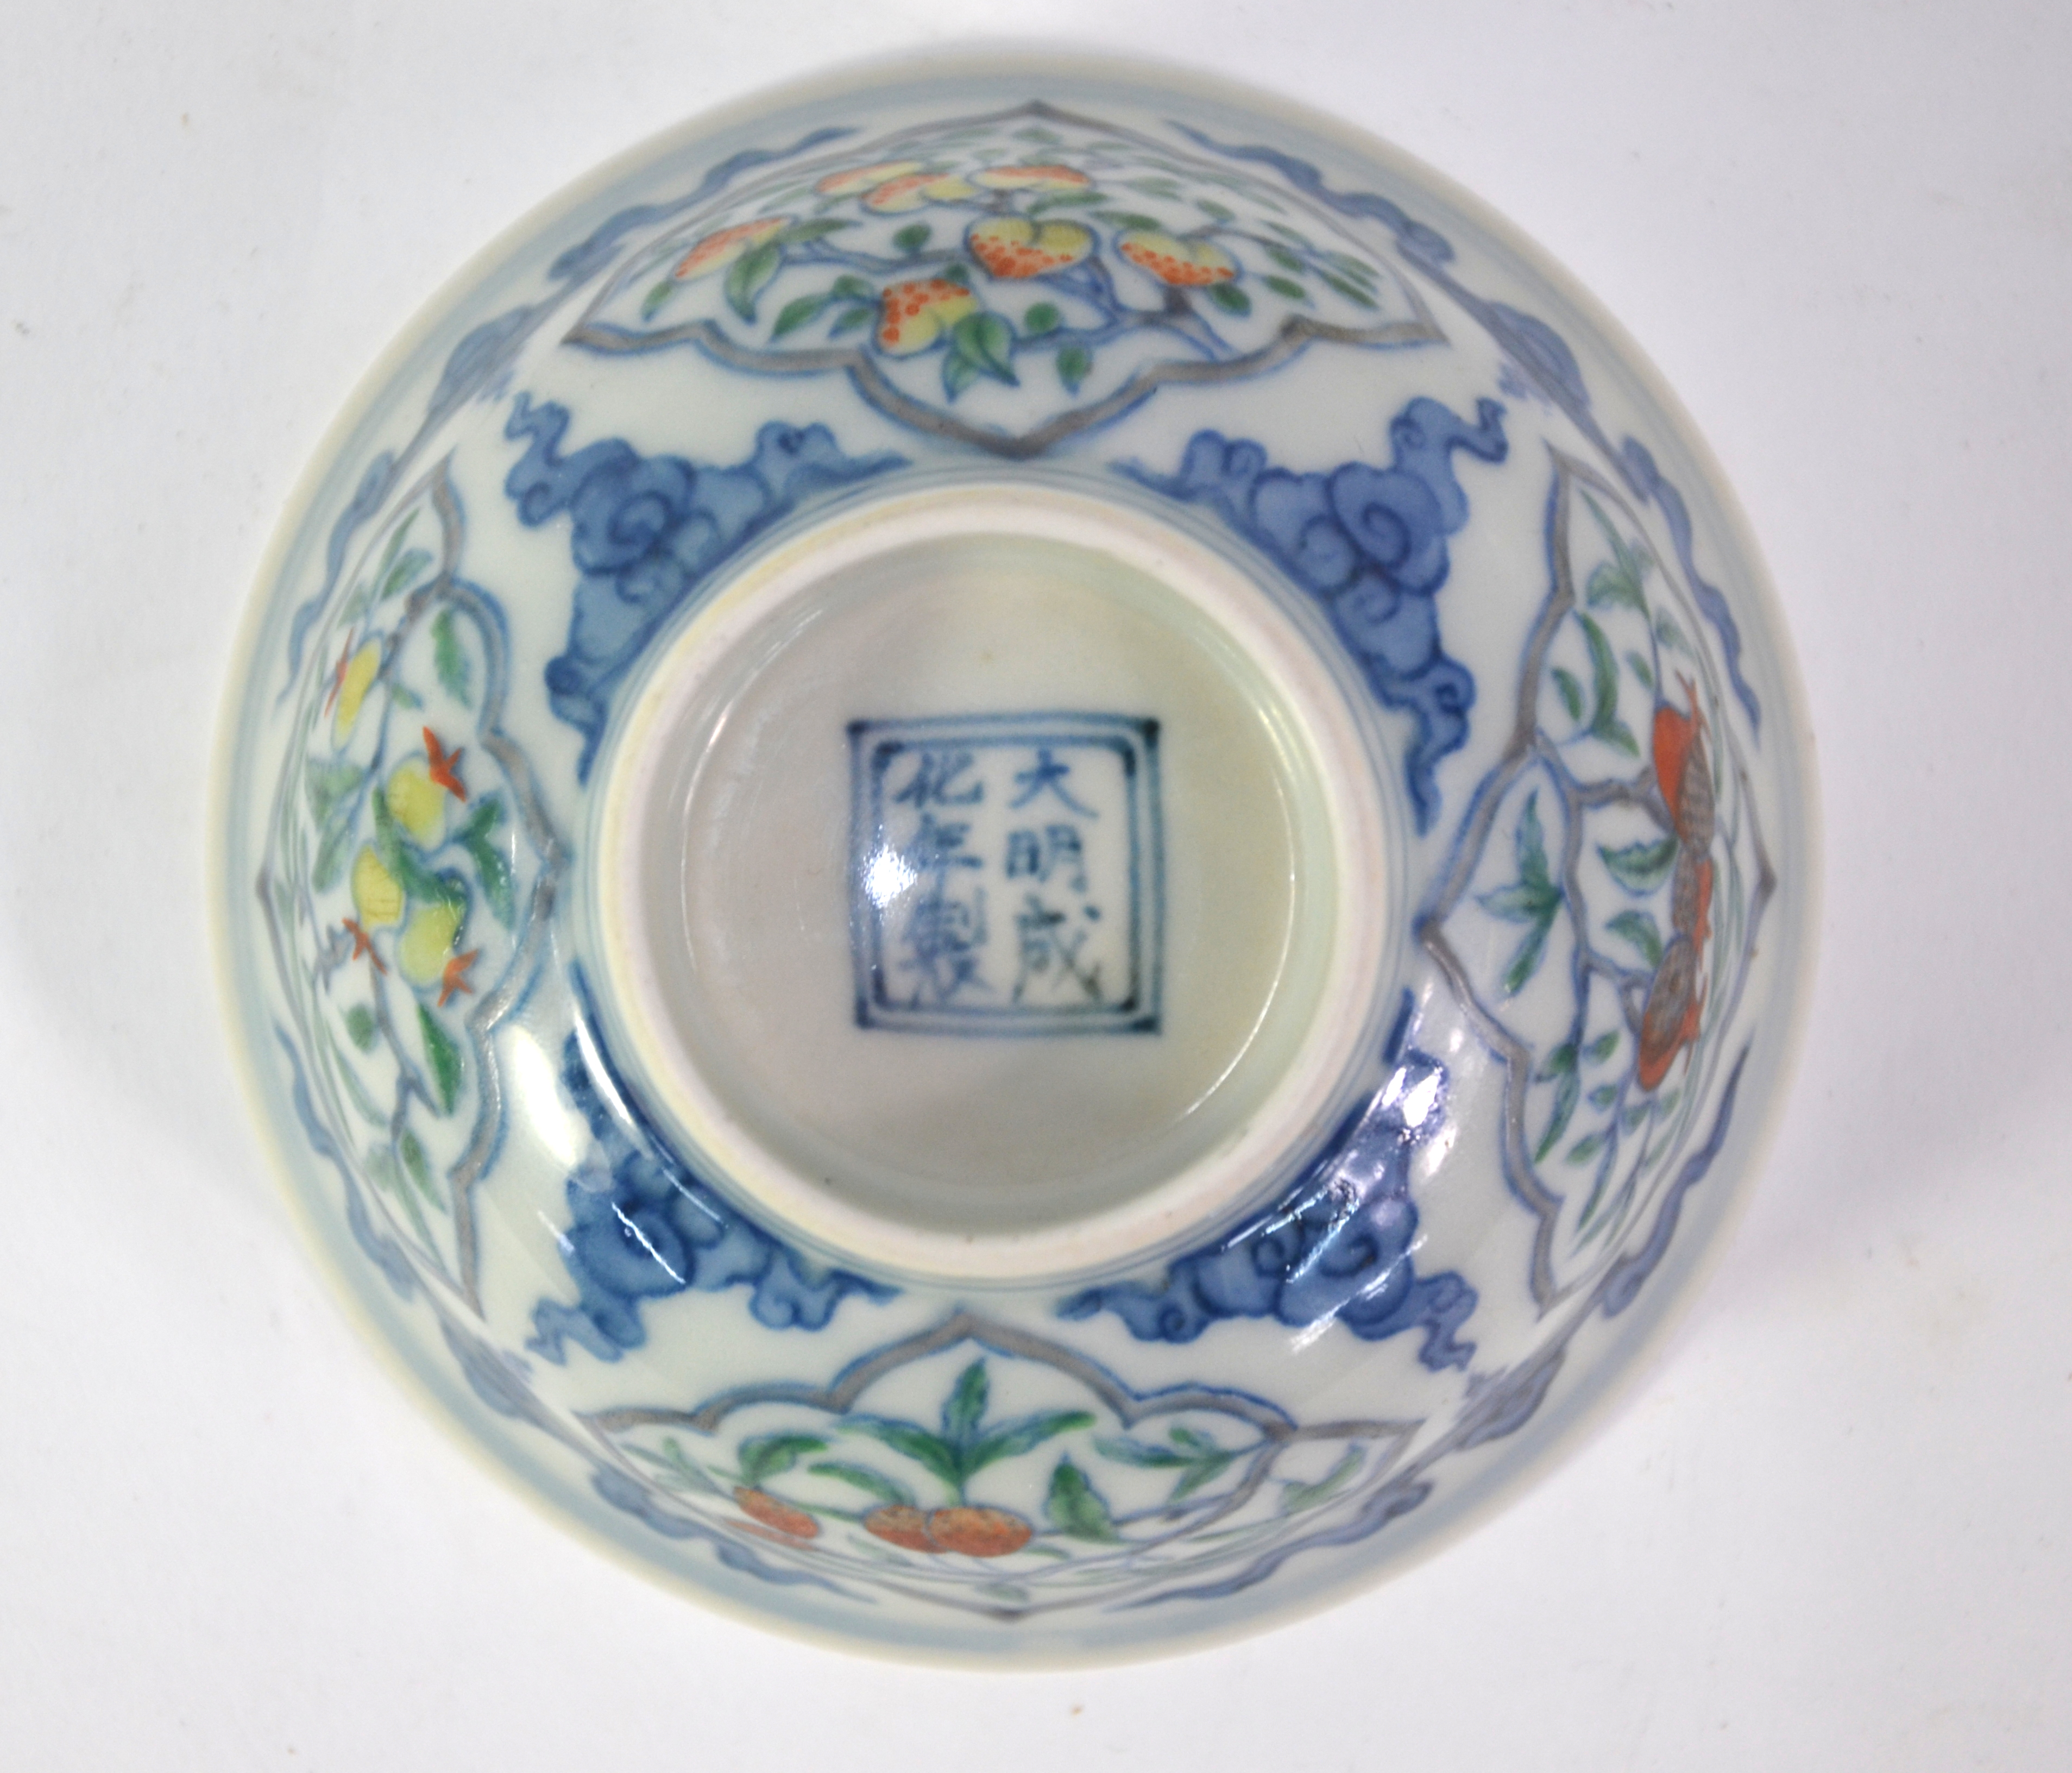 A Doucai bowl, decorated with underglaze blue cloud scrolls dividing four shaped panels of various - Image 5 of 6